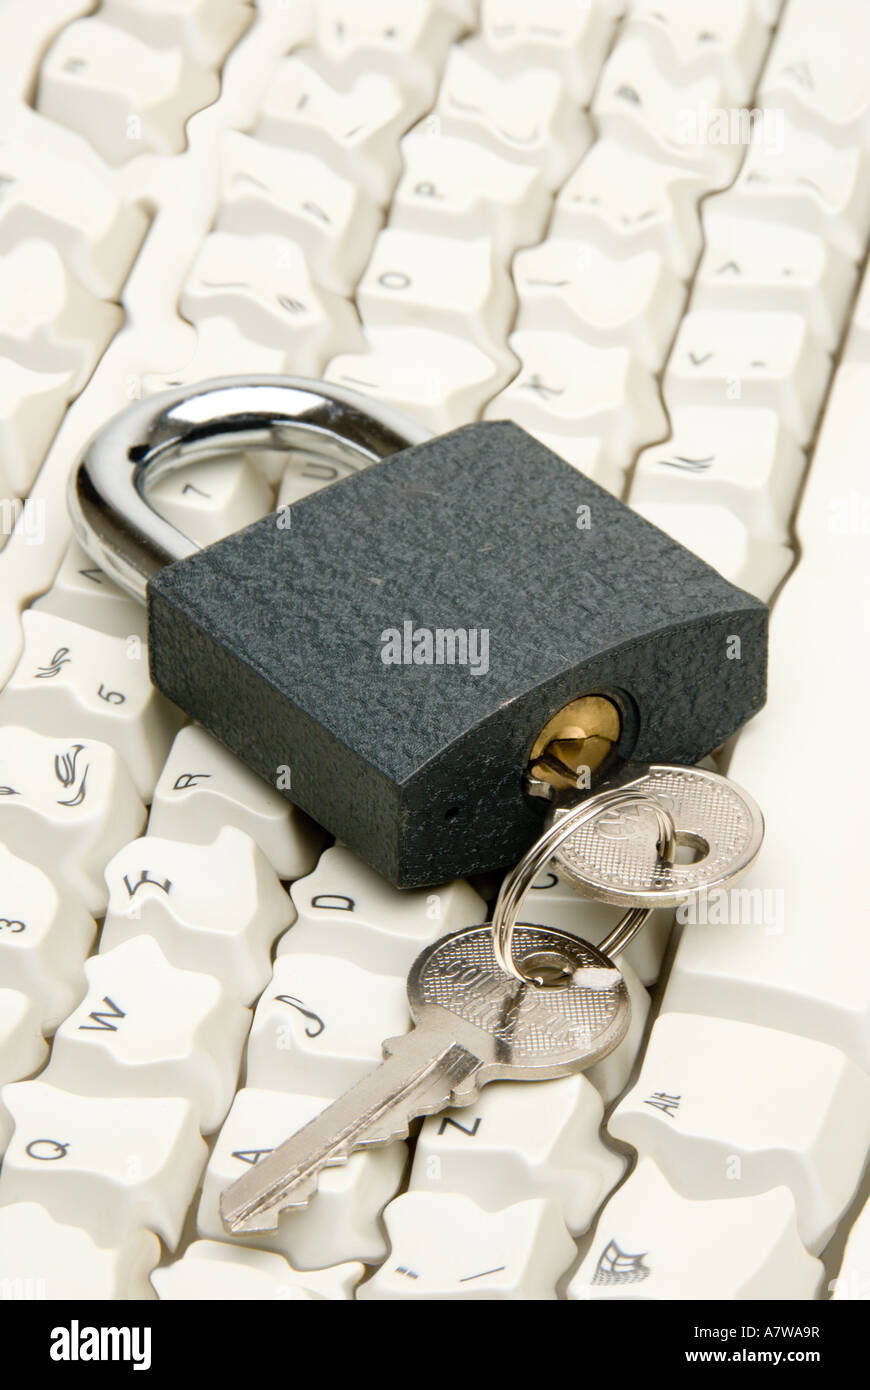 Computer keyboard digitally manipulated with key in lock - computer security concept. Stock Photo